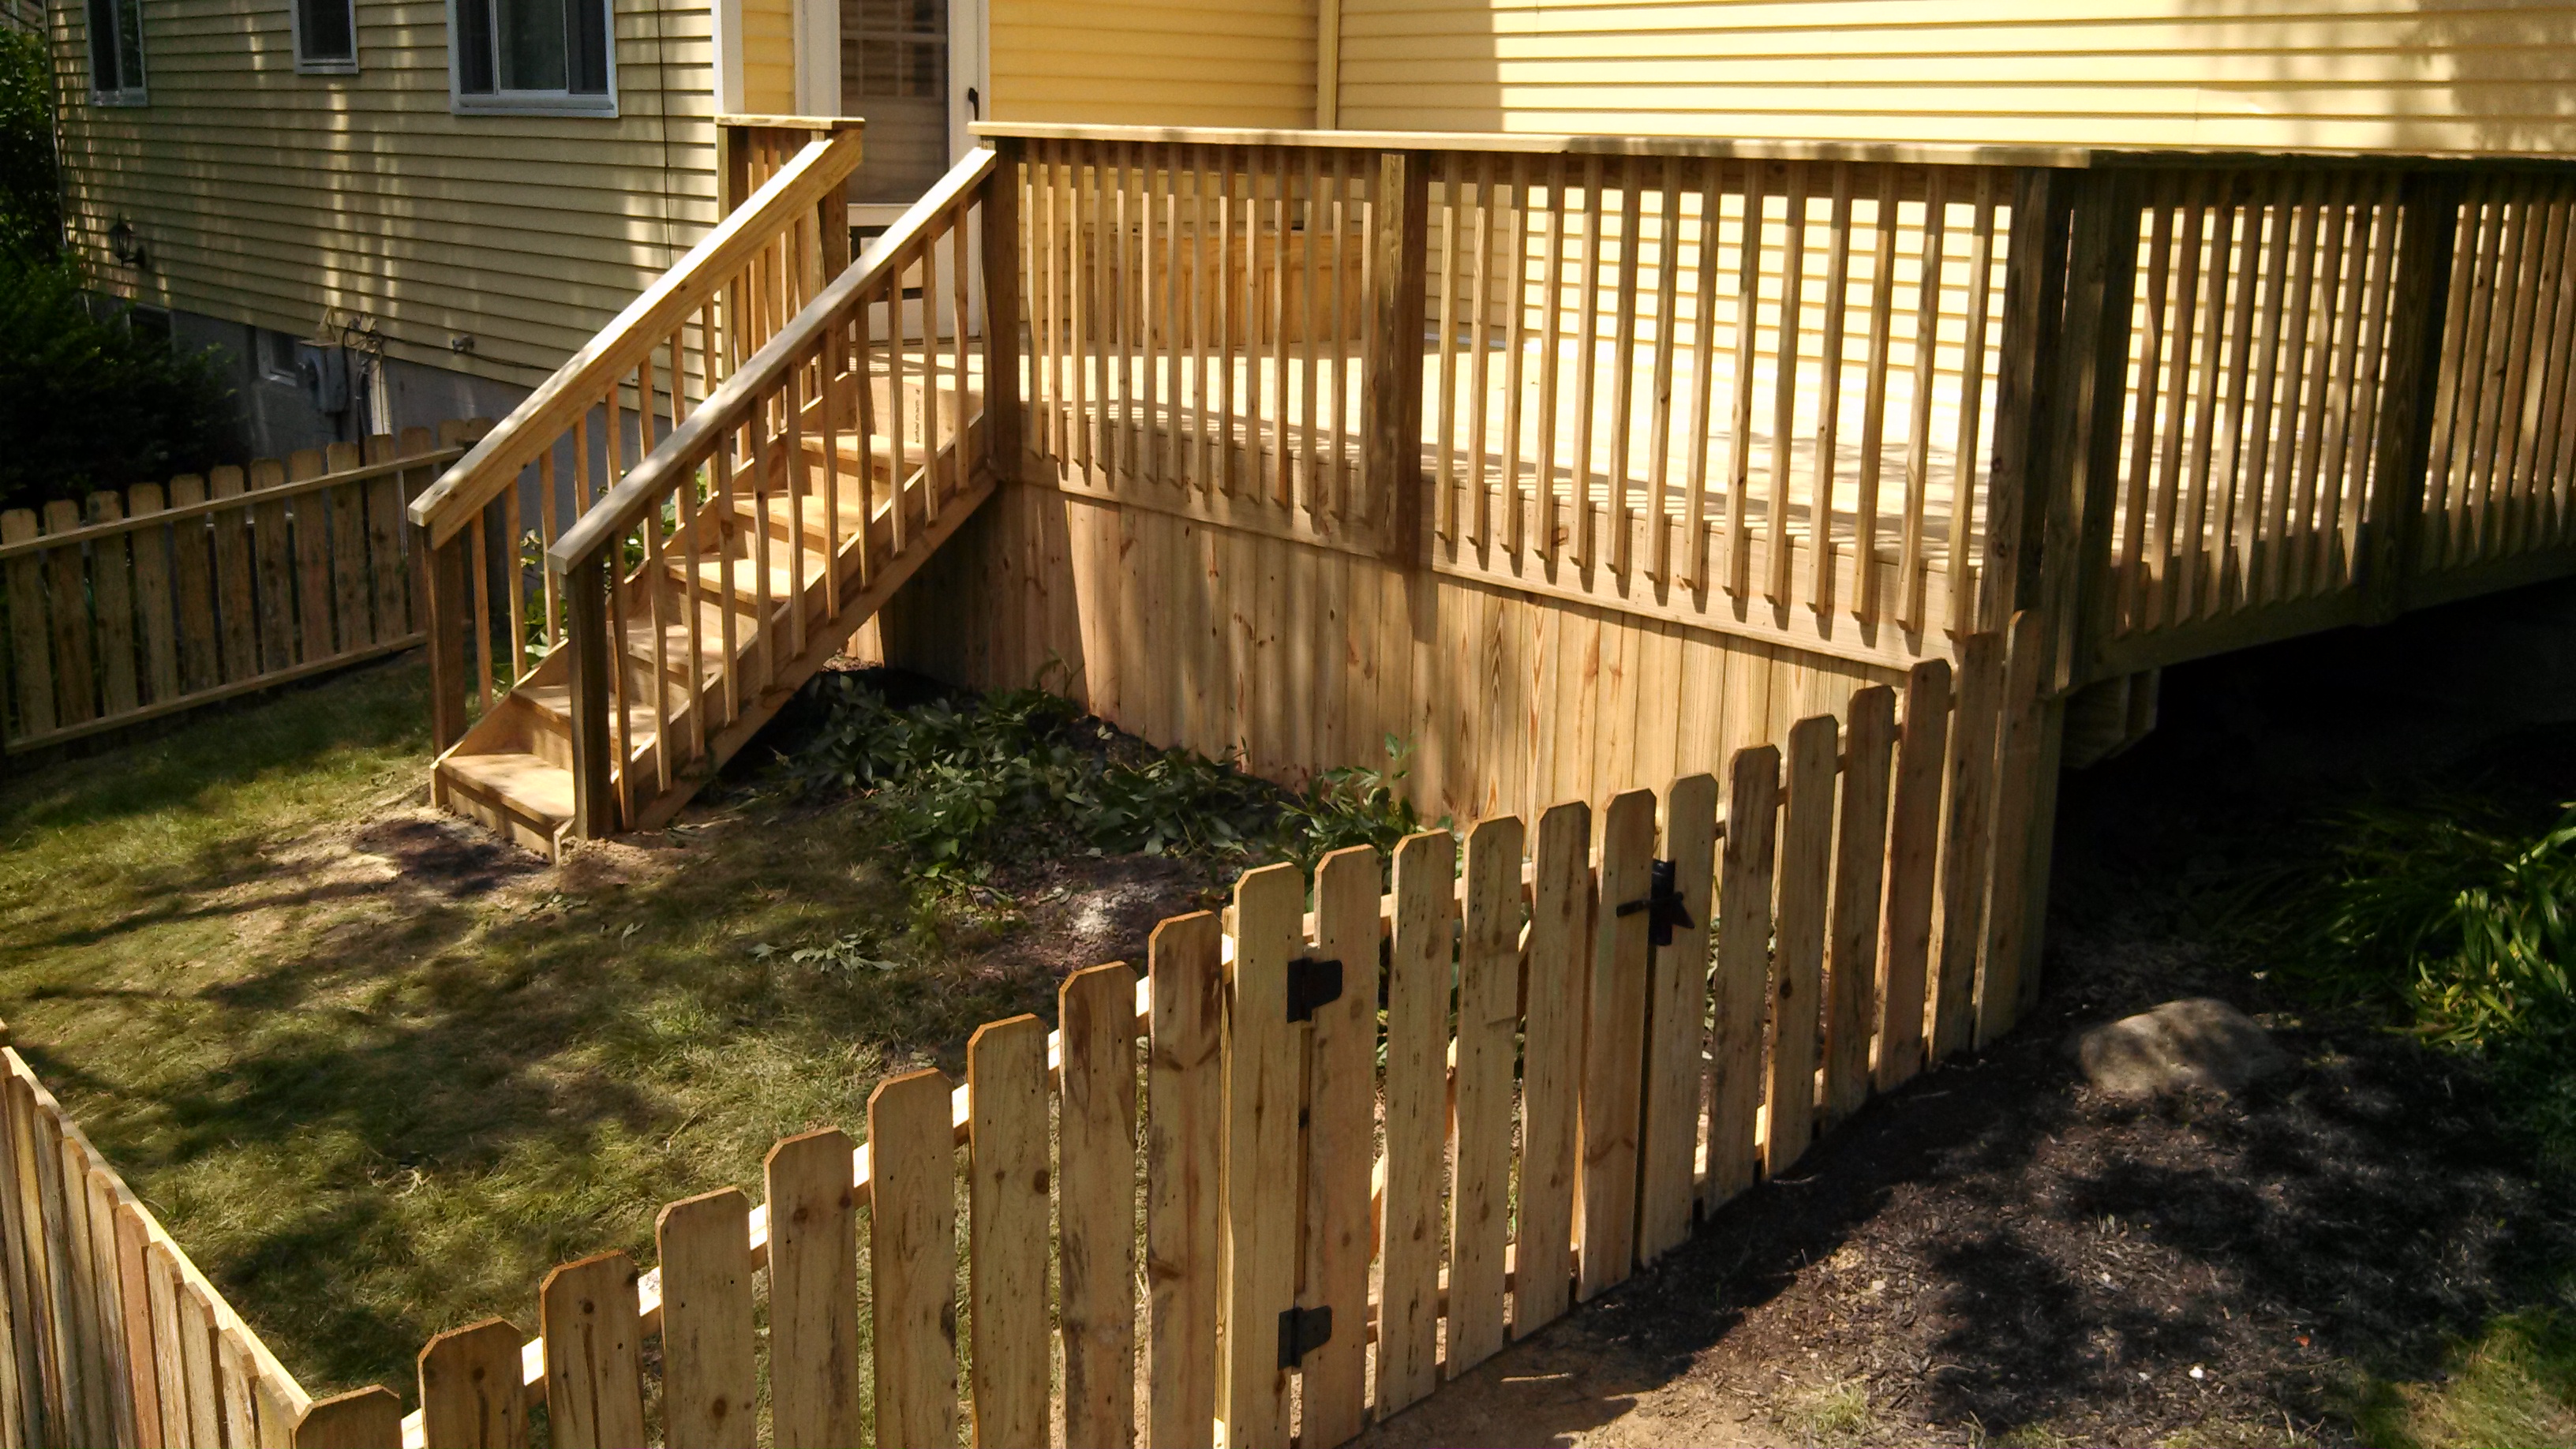 Treated wood deck and fence installed by Buckstone Builders in Stow - Summit County, Northeast Ohio